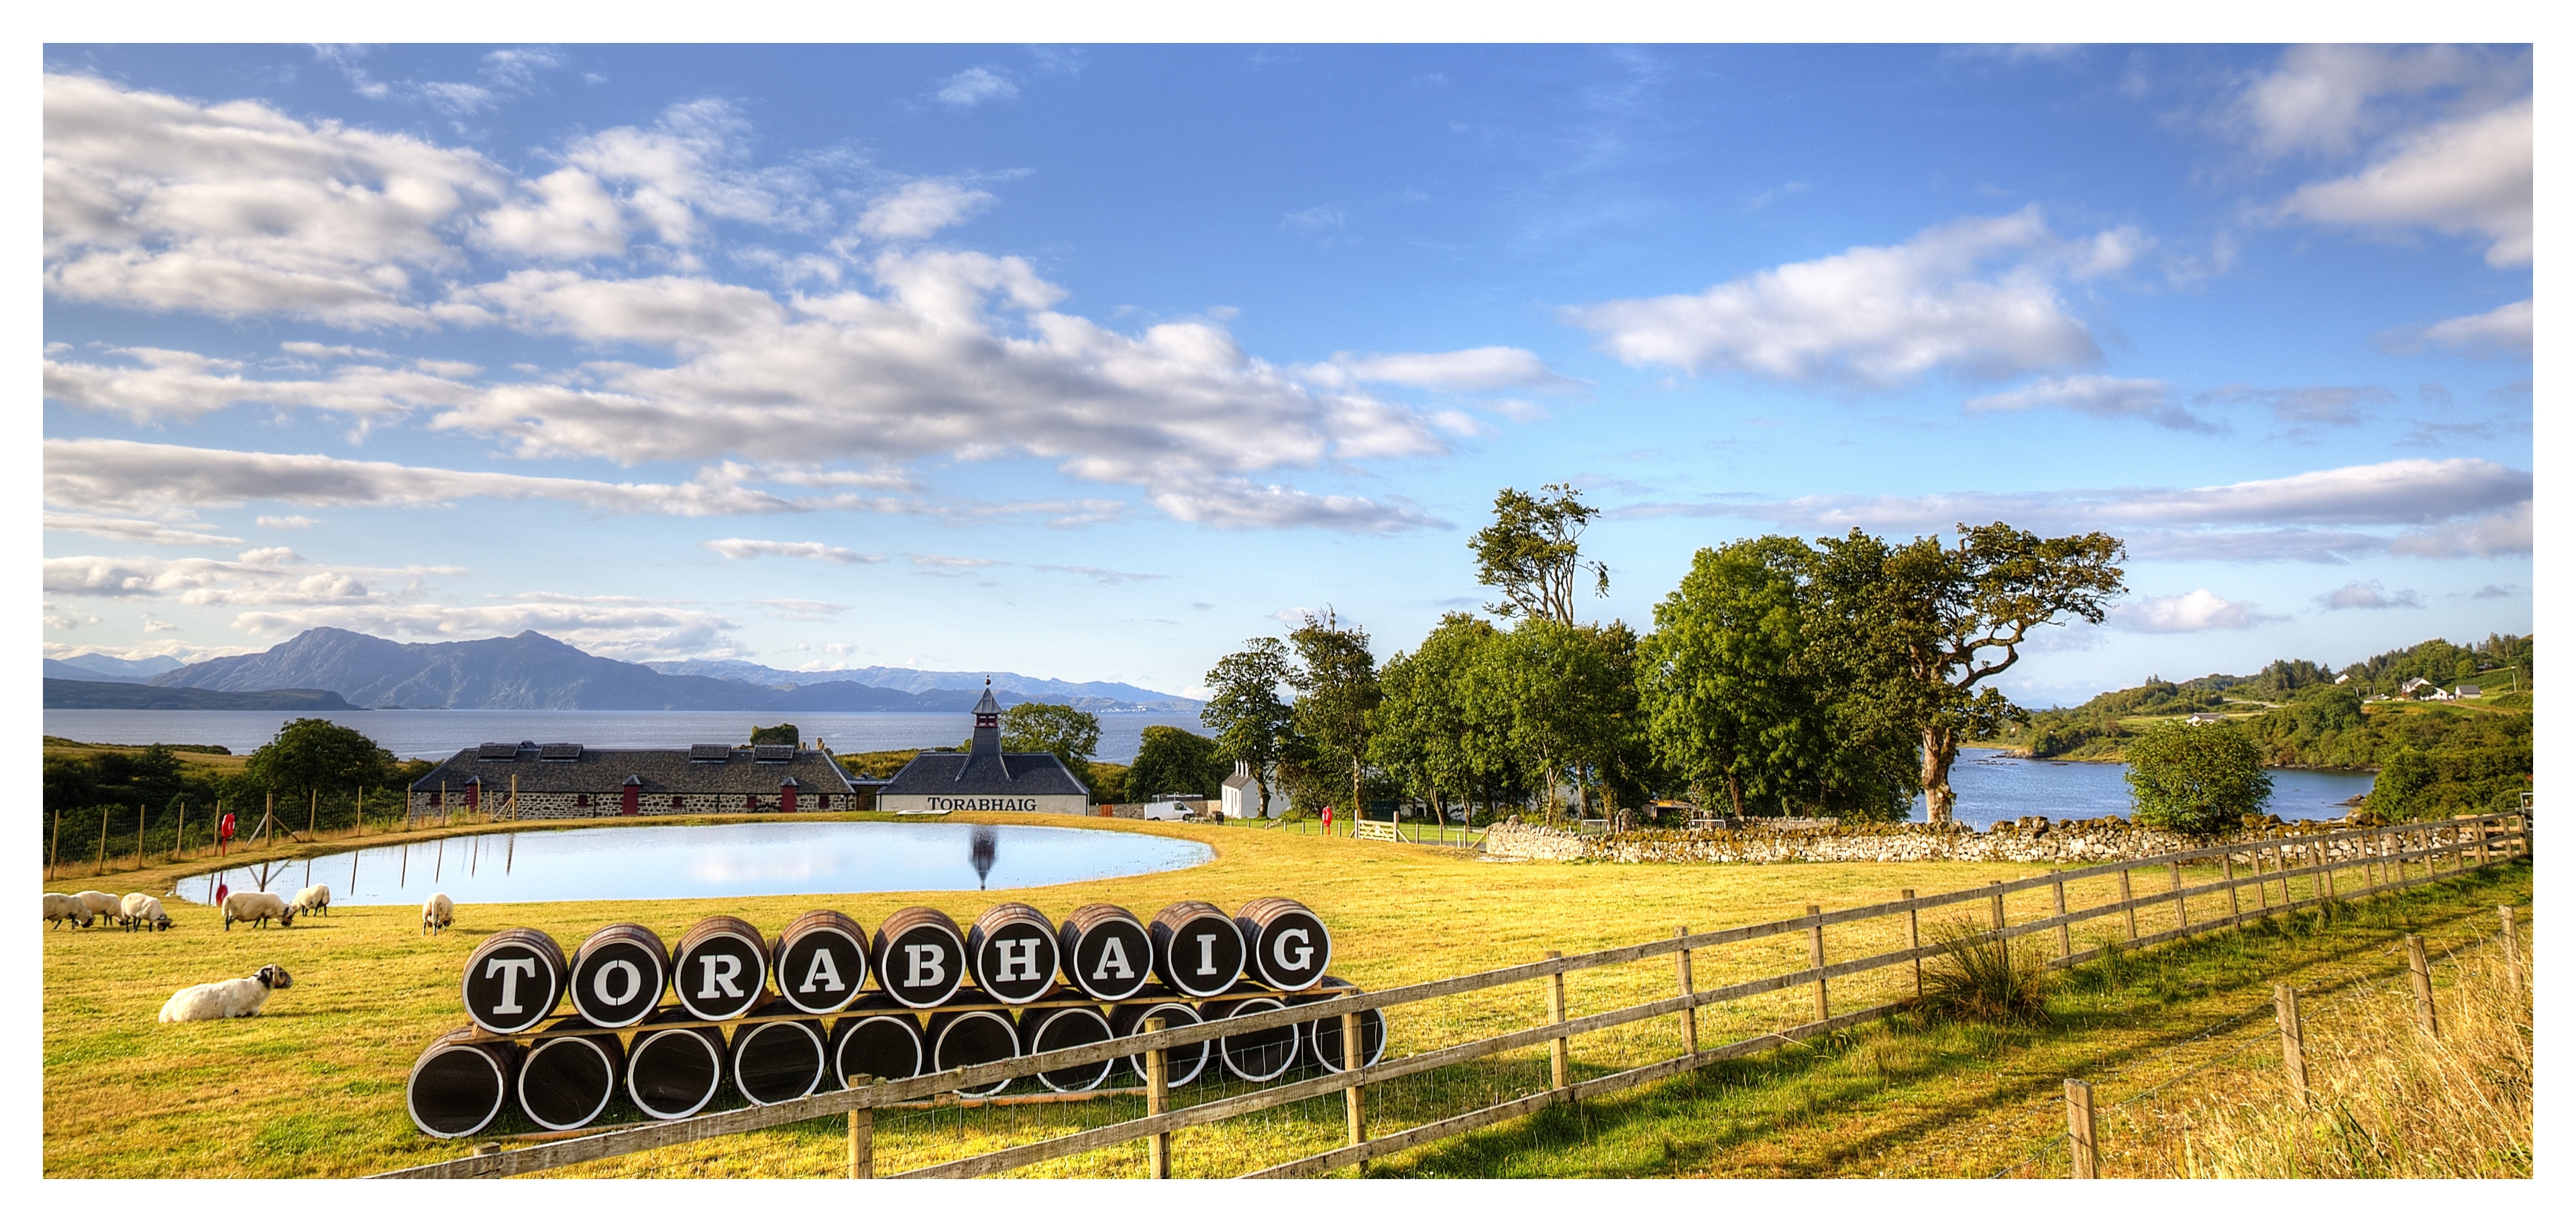 the pleasant surroundings of the distillery couldn't have a more spectacular backdrop!